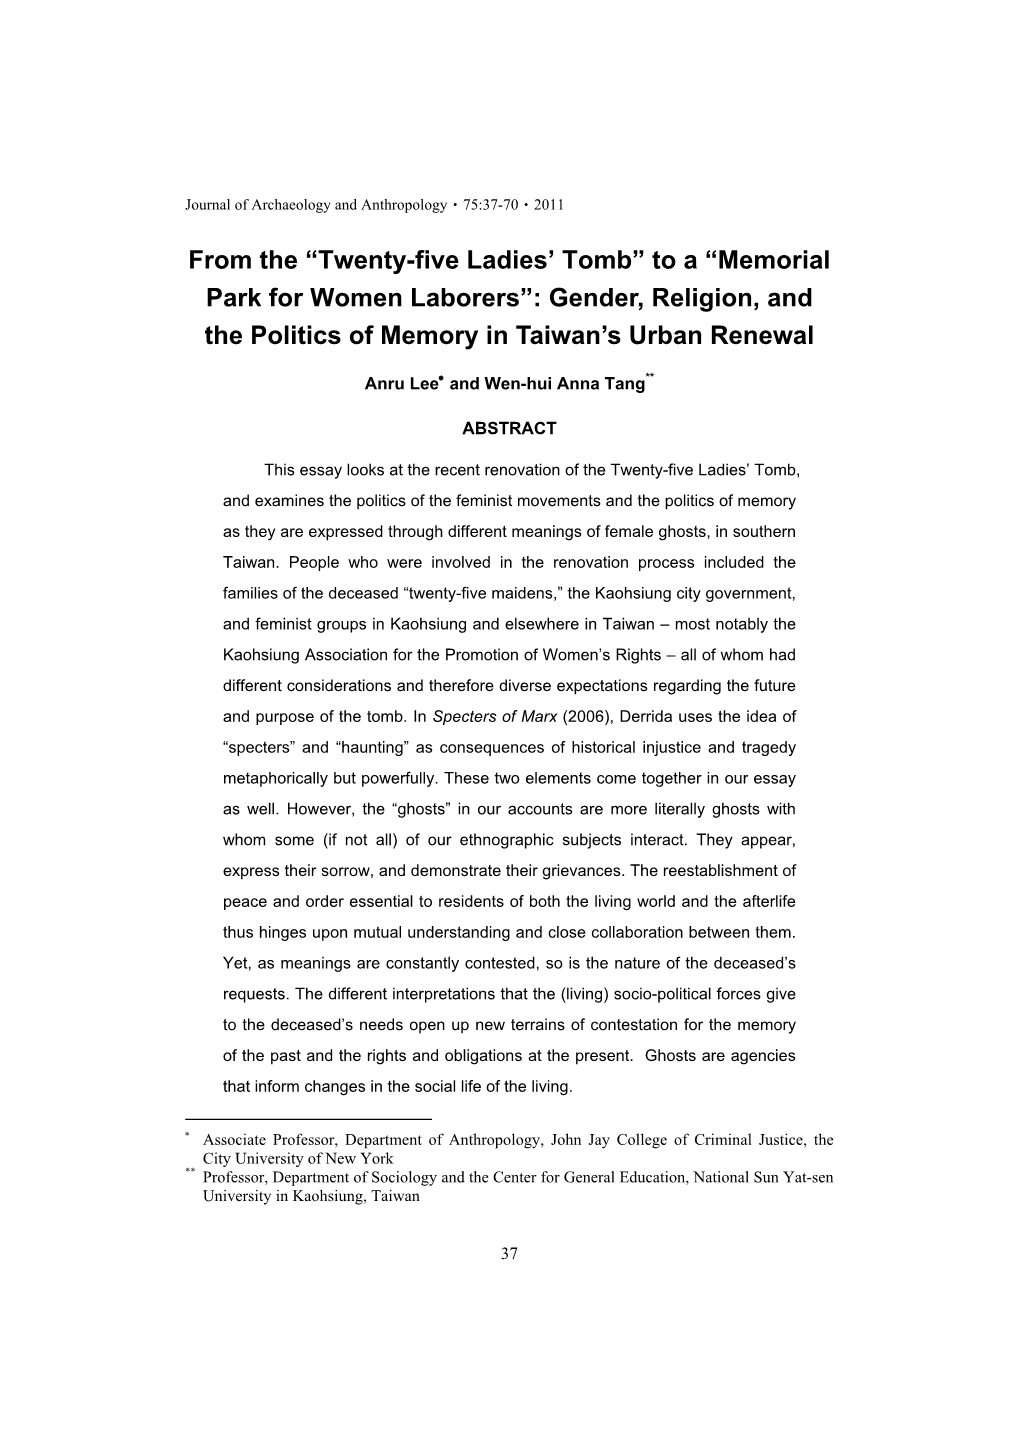 Memorial Park for Women Laborers”: Gender, Religion, and the Politics of Memory in Taiwan’S Urban Renewal